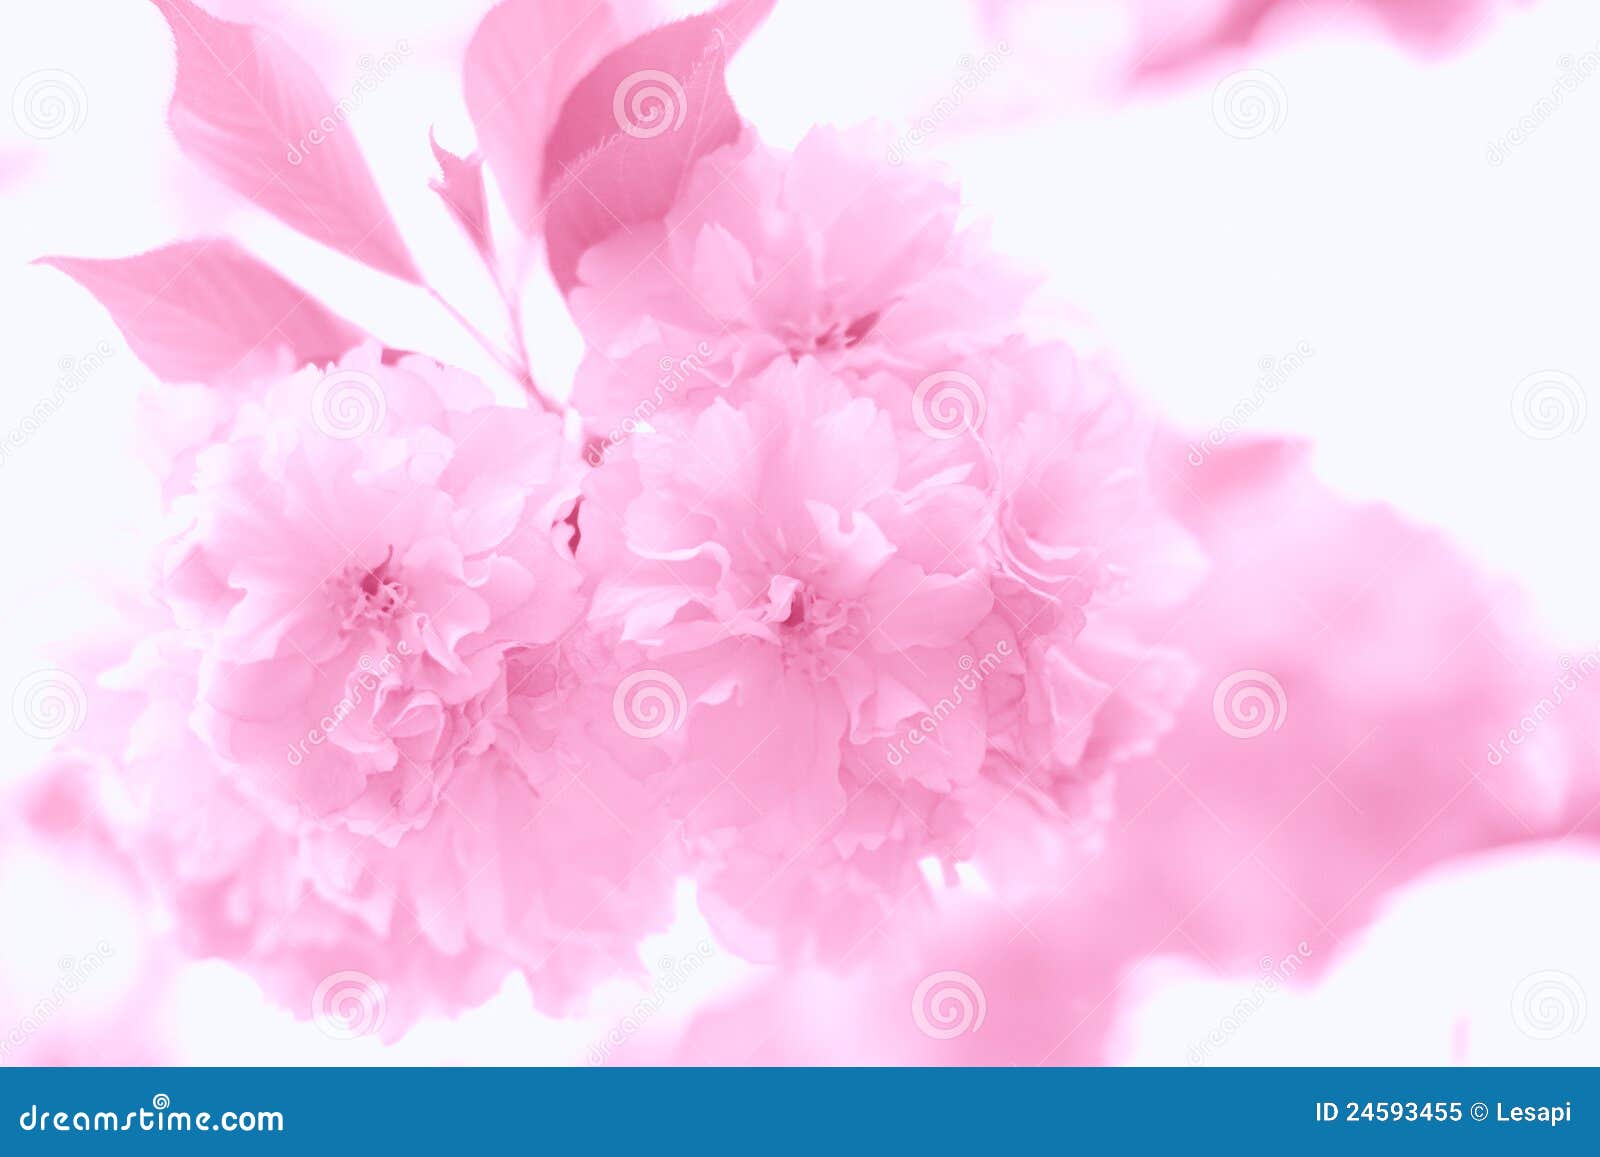 delicate pink floral background